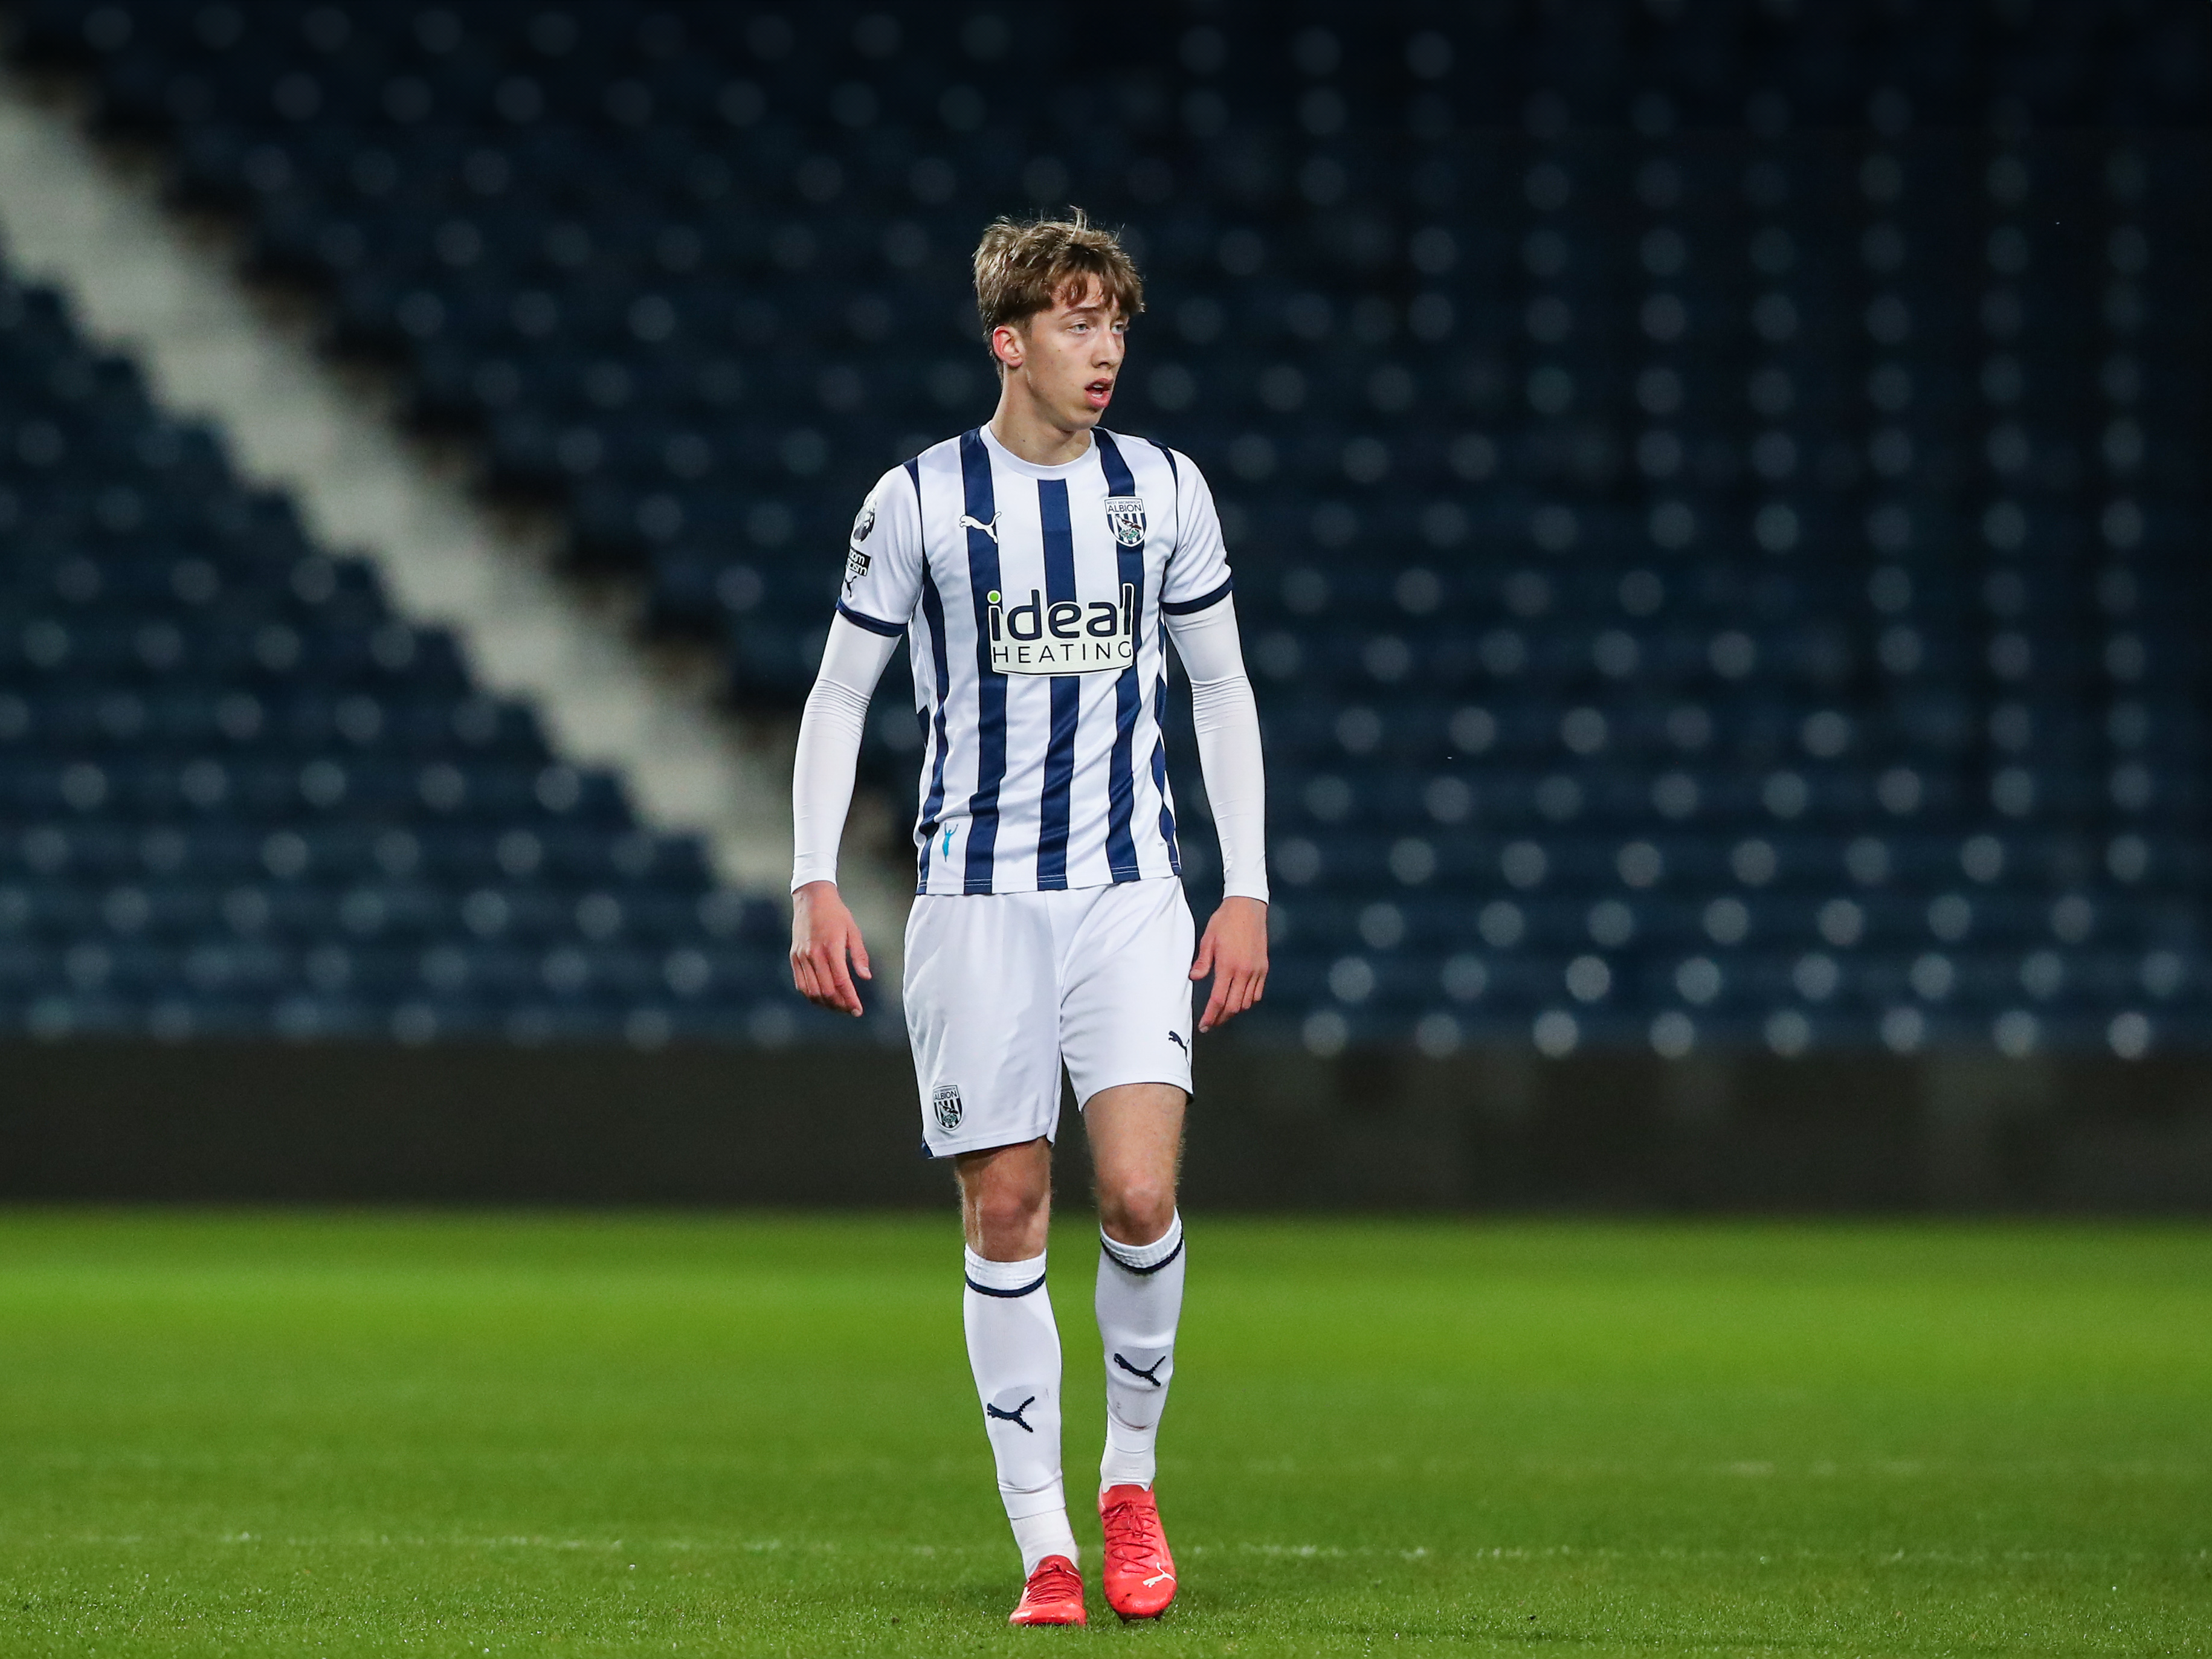 A photo of Albion youngster Harry Whitwell, in the 23/24 home kit, in action at The Hawthorns